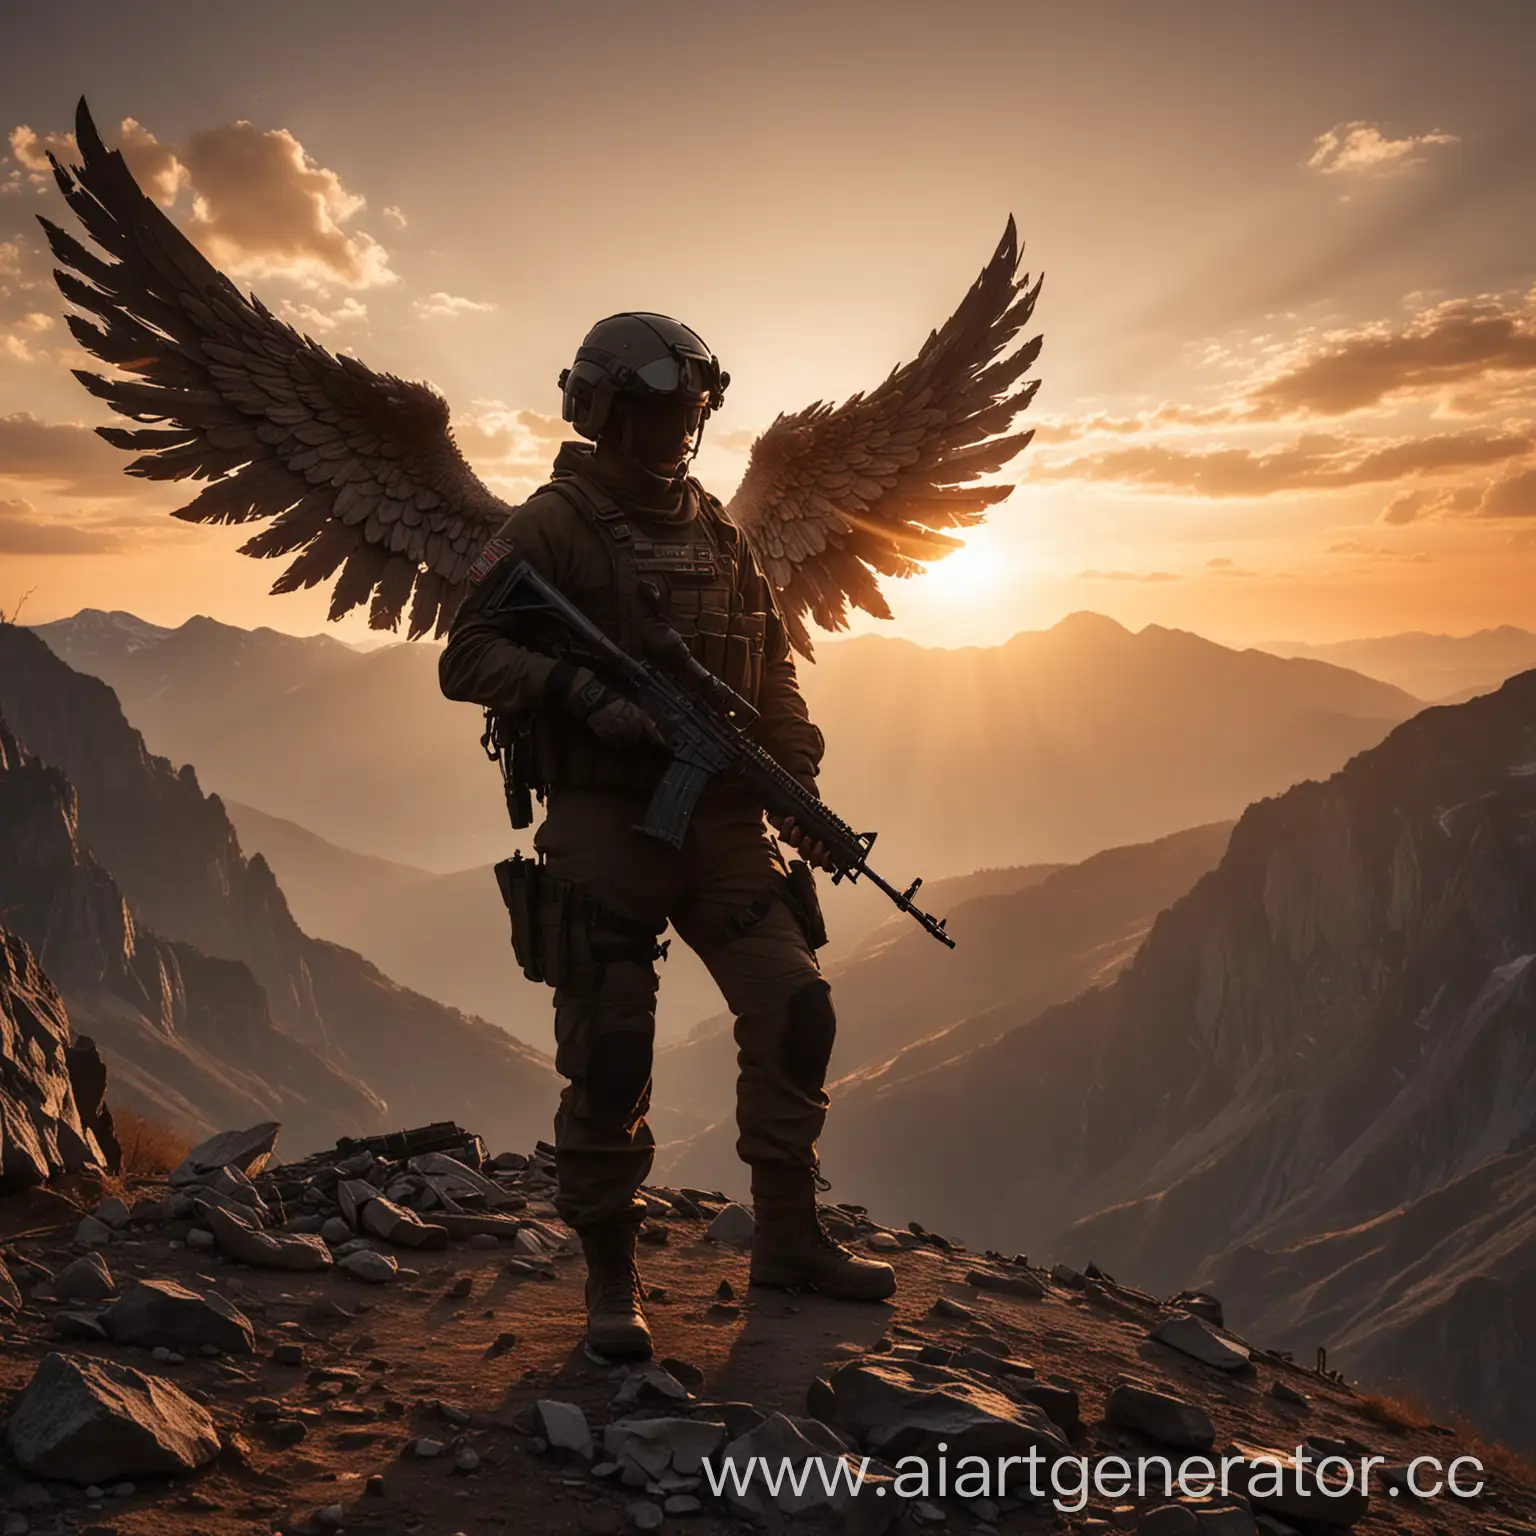 Darkened Military stands on mountain under sunset with angel wings holding ak74 without arch above head in tactical helmet